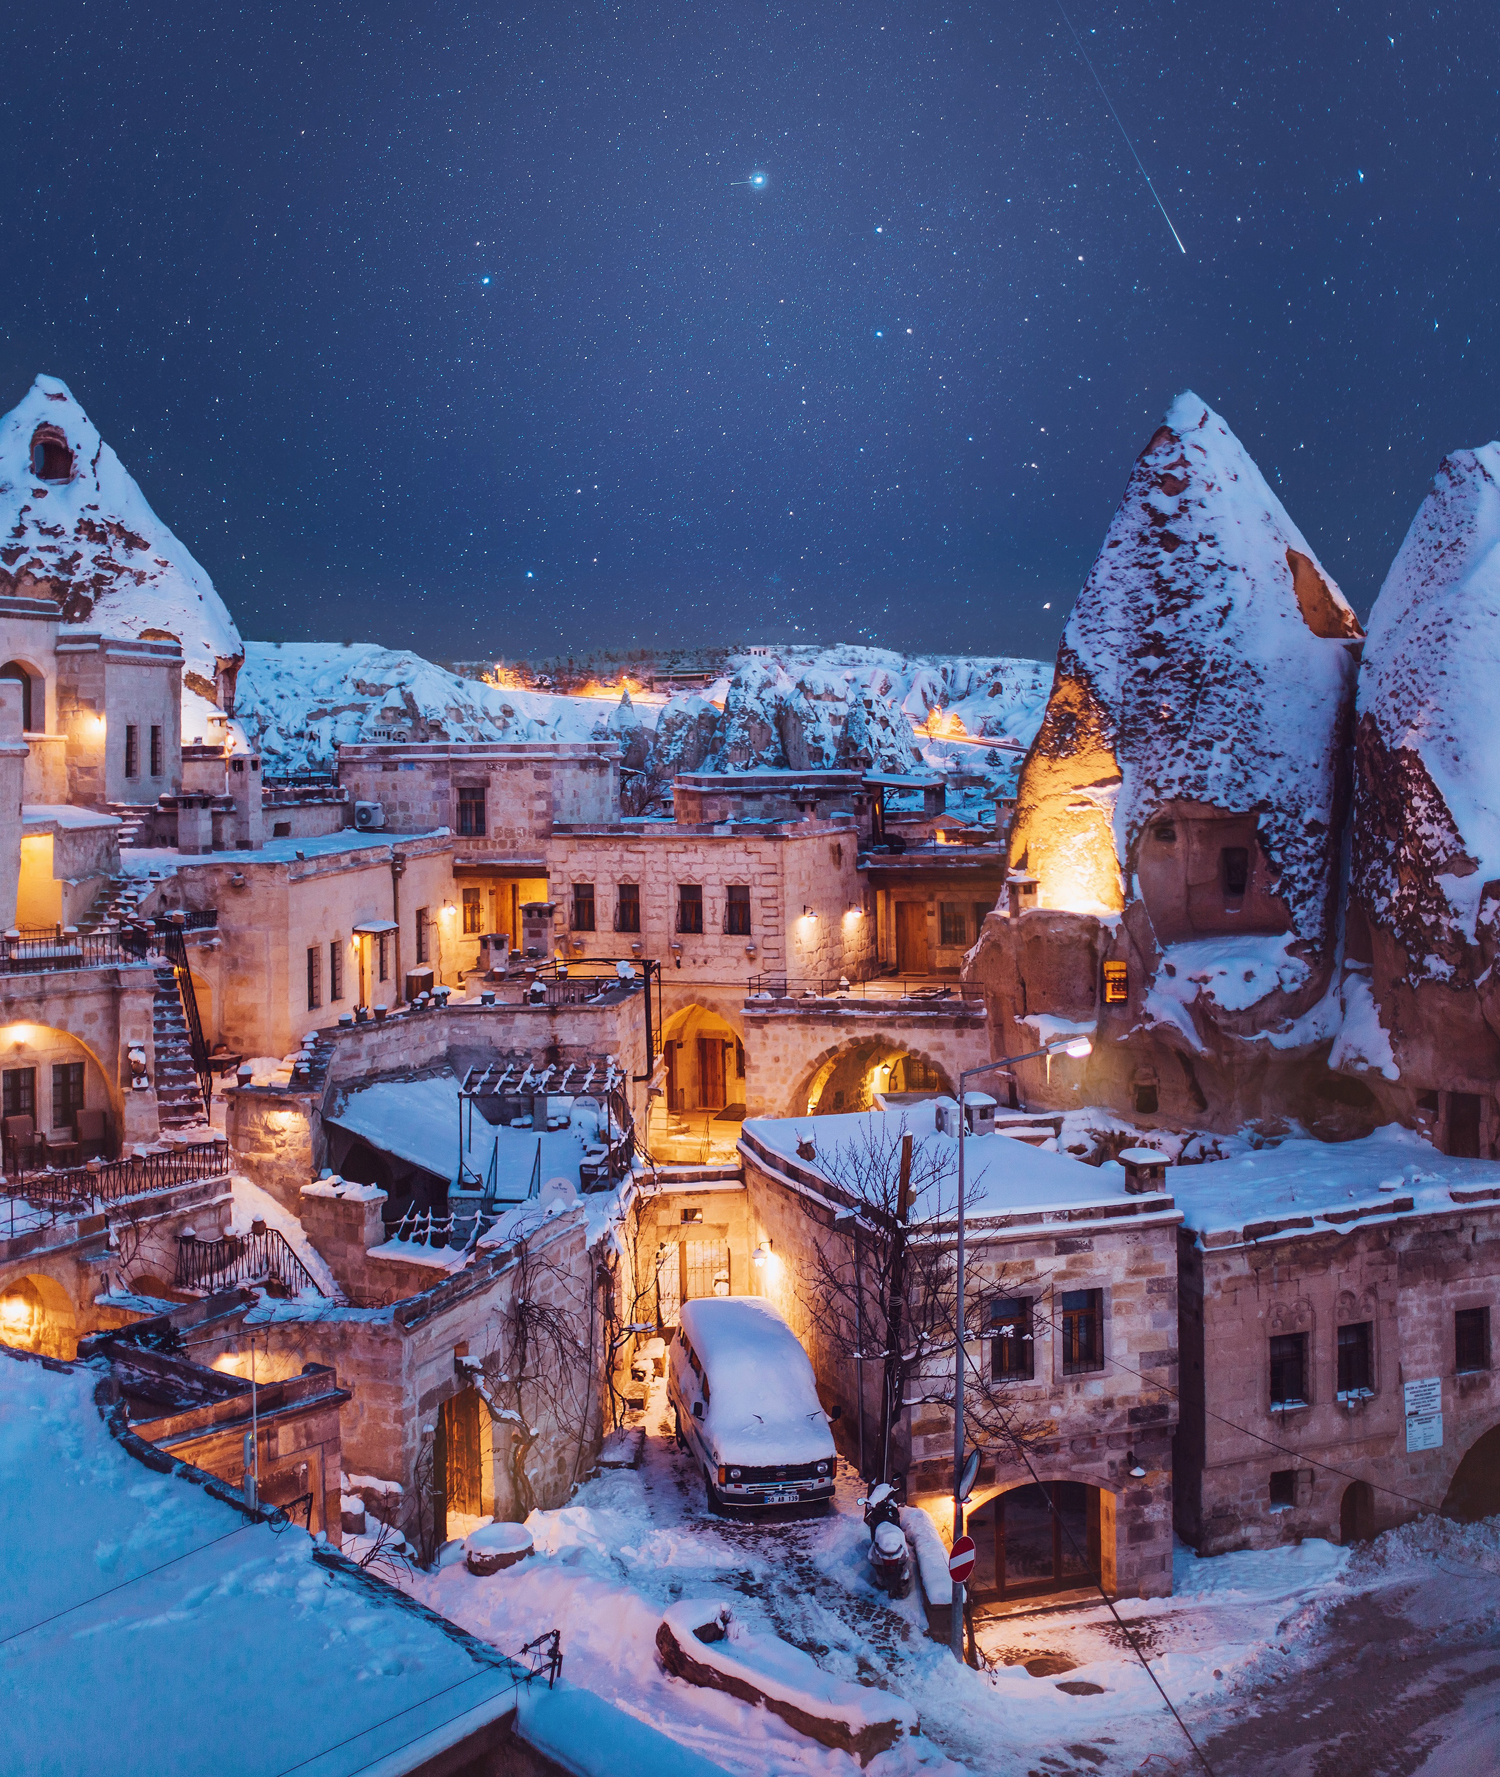 General 1500x1777 architecture building cityscape city night winter snow car lights old building house clear sky stars rooftops Cappadocia Turkey